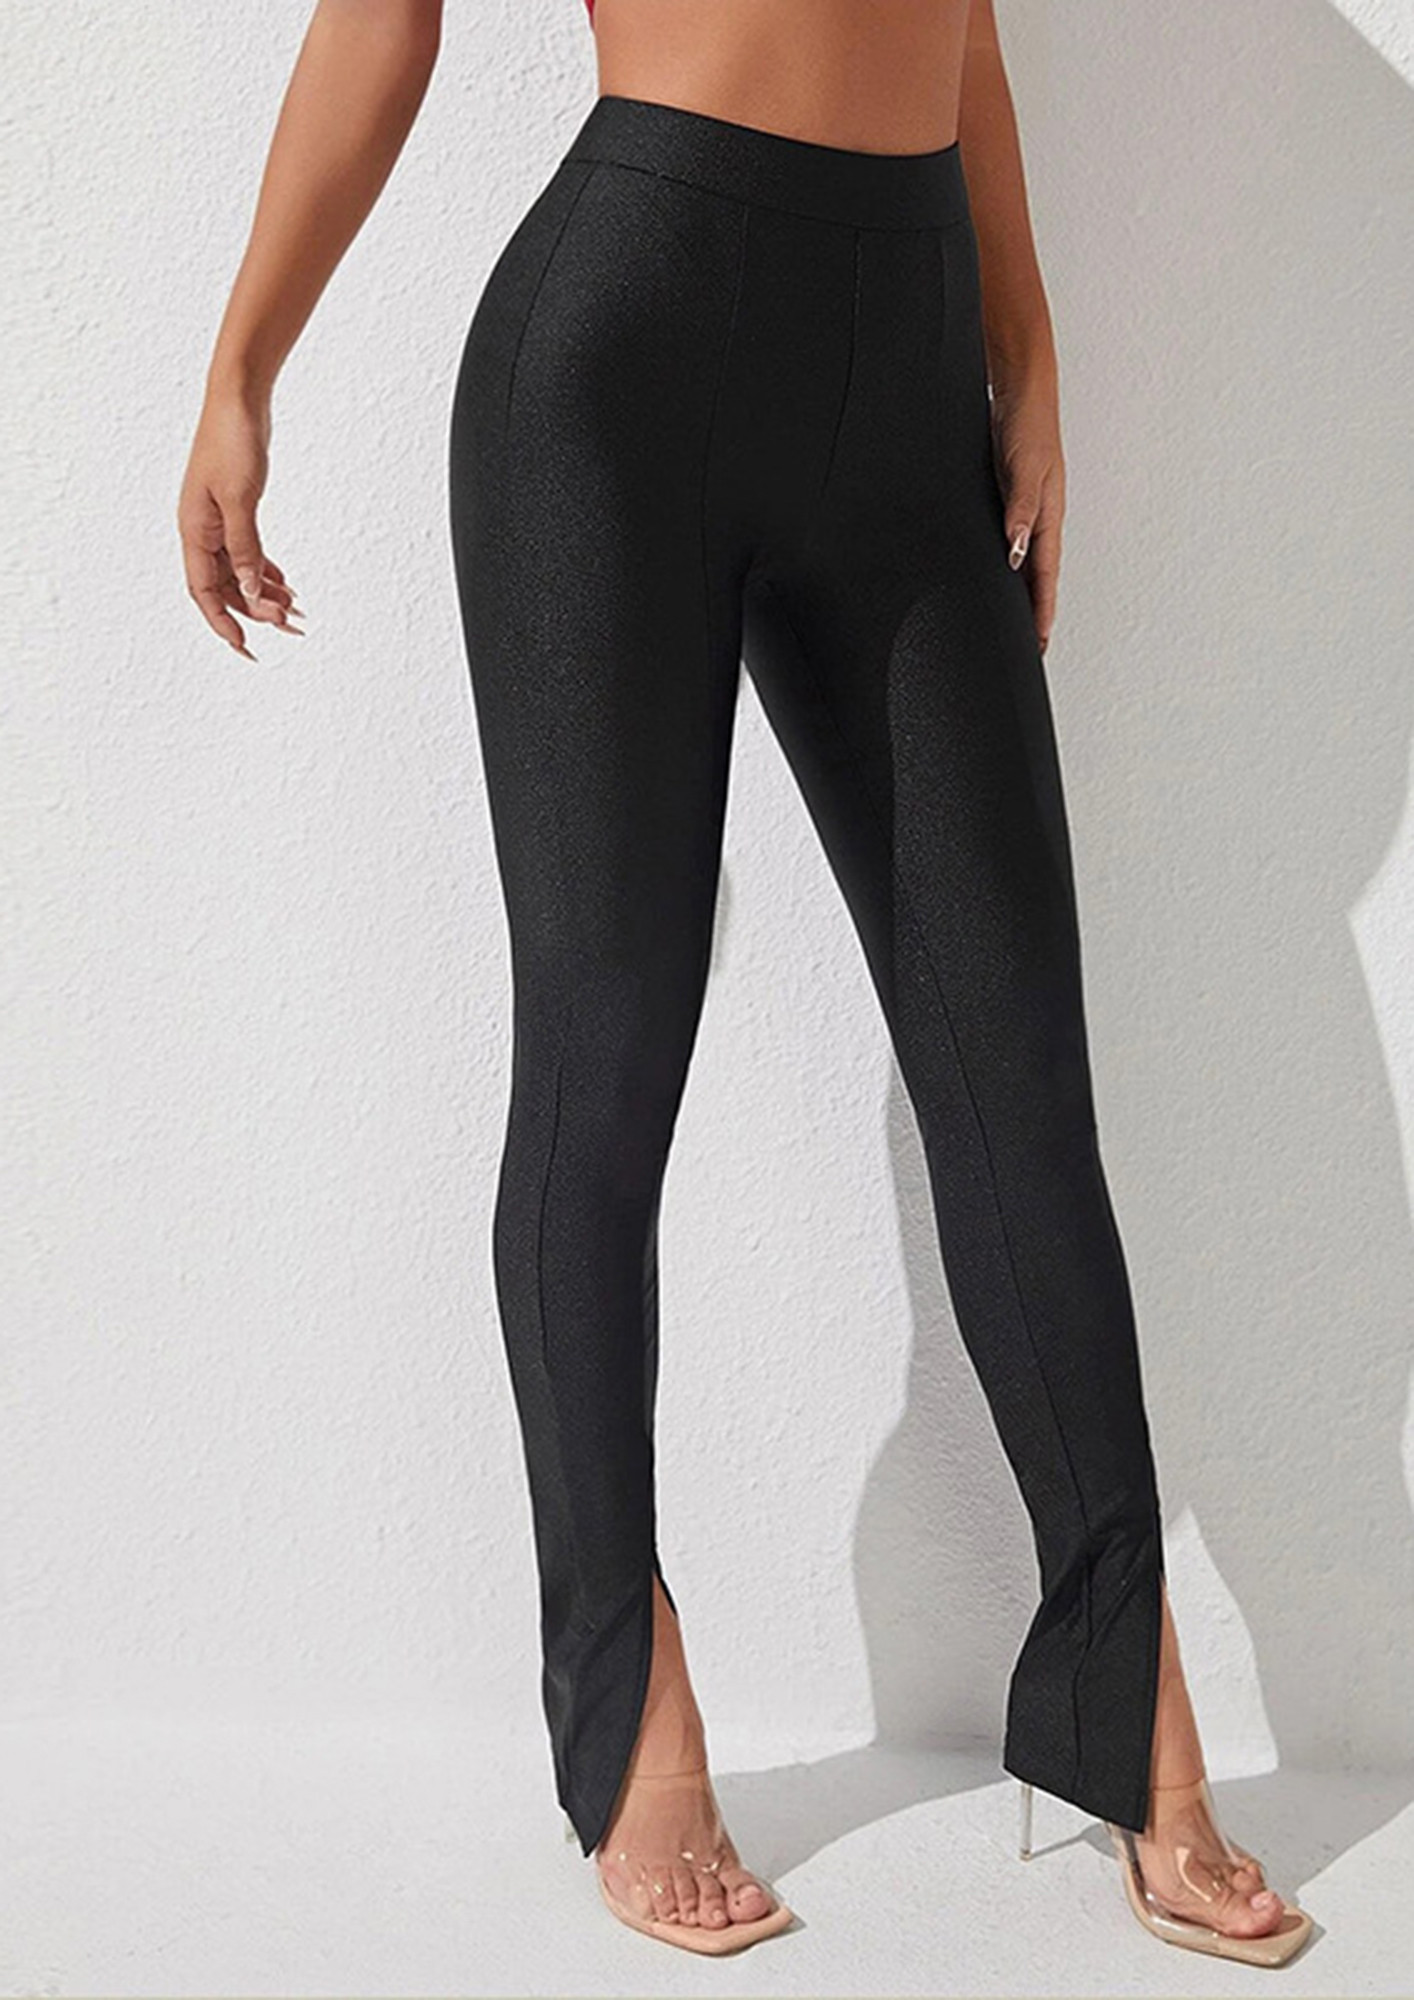 Buy online Mid Rise Solid Leggings from Capris & Leggings for Women by Dark  Black Style for ₹319 at 68% off